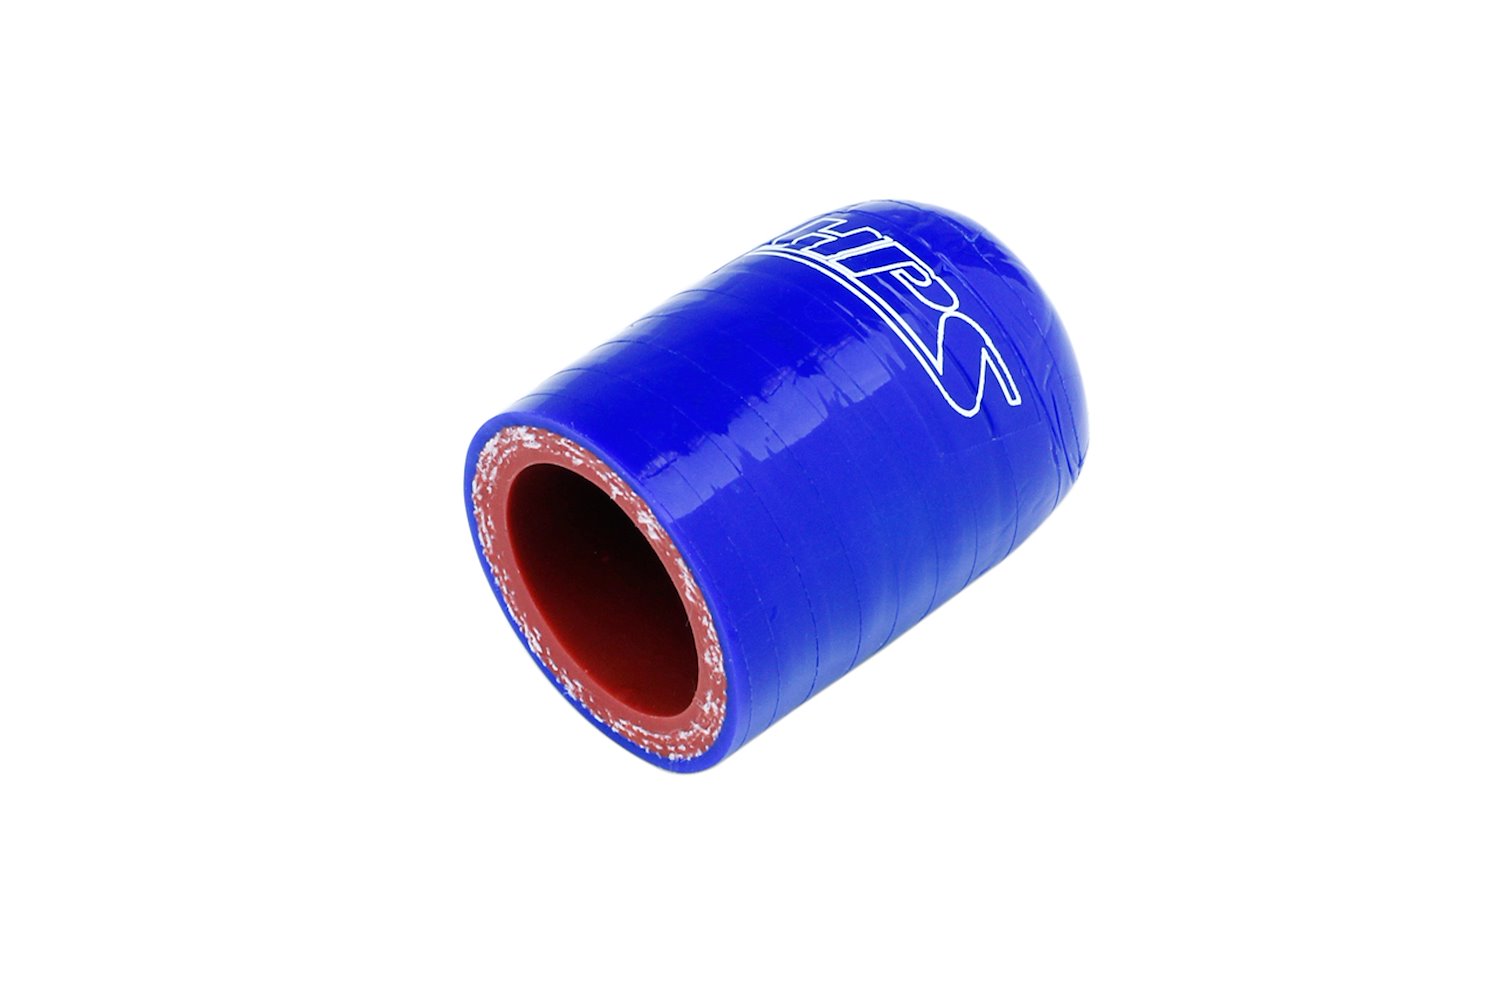 RSCC-055-BLUE Coolant Bypass Cap, 3-Ply Reinforced High-Temp. Silicone Bypass Cap, 9/16 in. ID, Blue